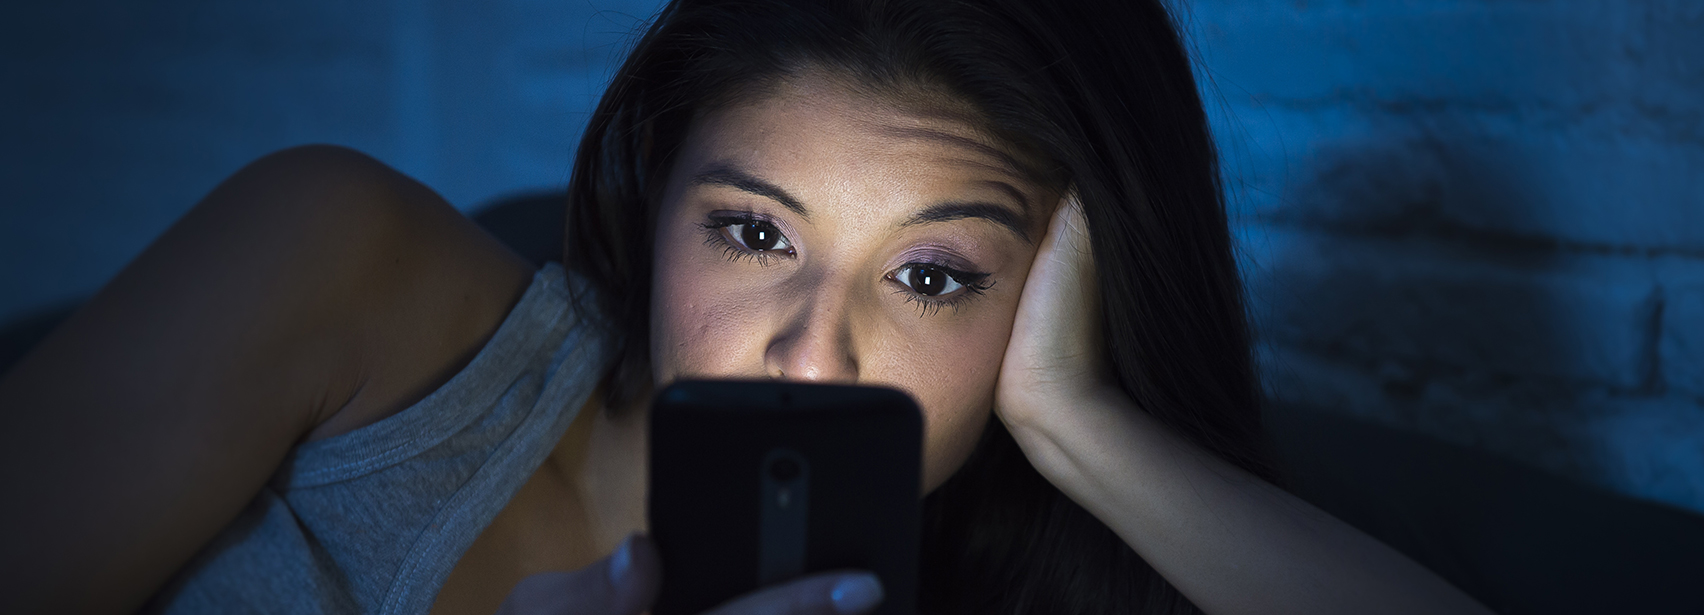 Is Cuddling With Your Phone Keeping You From Better Sleep?